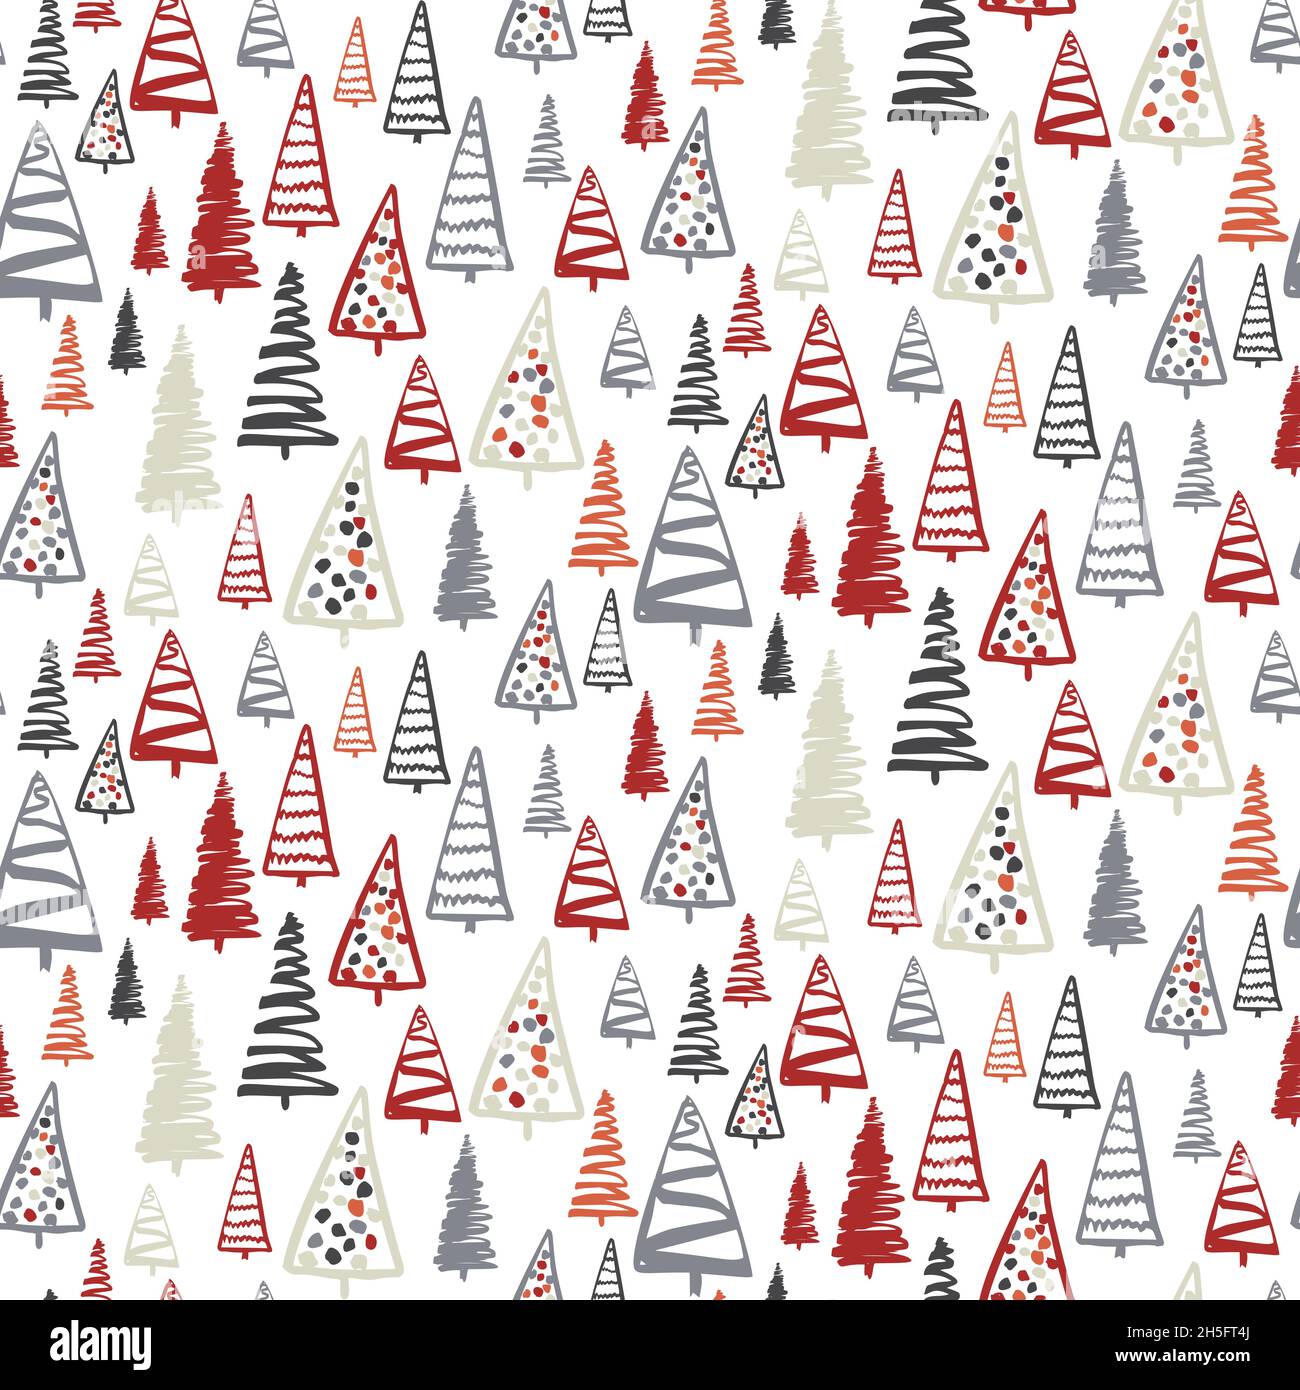 https://c8.alamy.com/comp/2H5FT4J/simple-minimalist-christmas-trees-on-white-seamless-pattern-sketch-drawing-colorful-fir-for-textile-wrapping-paper-new-year-and-christmas-cards-wa-2H5FT4J.jpg